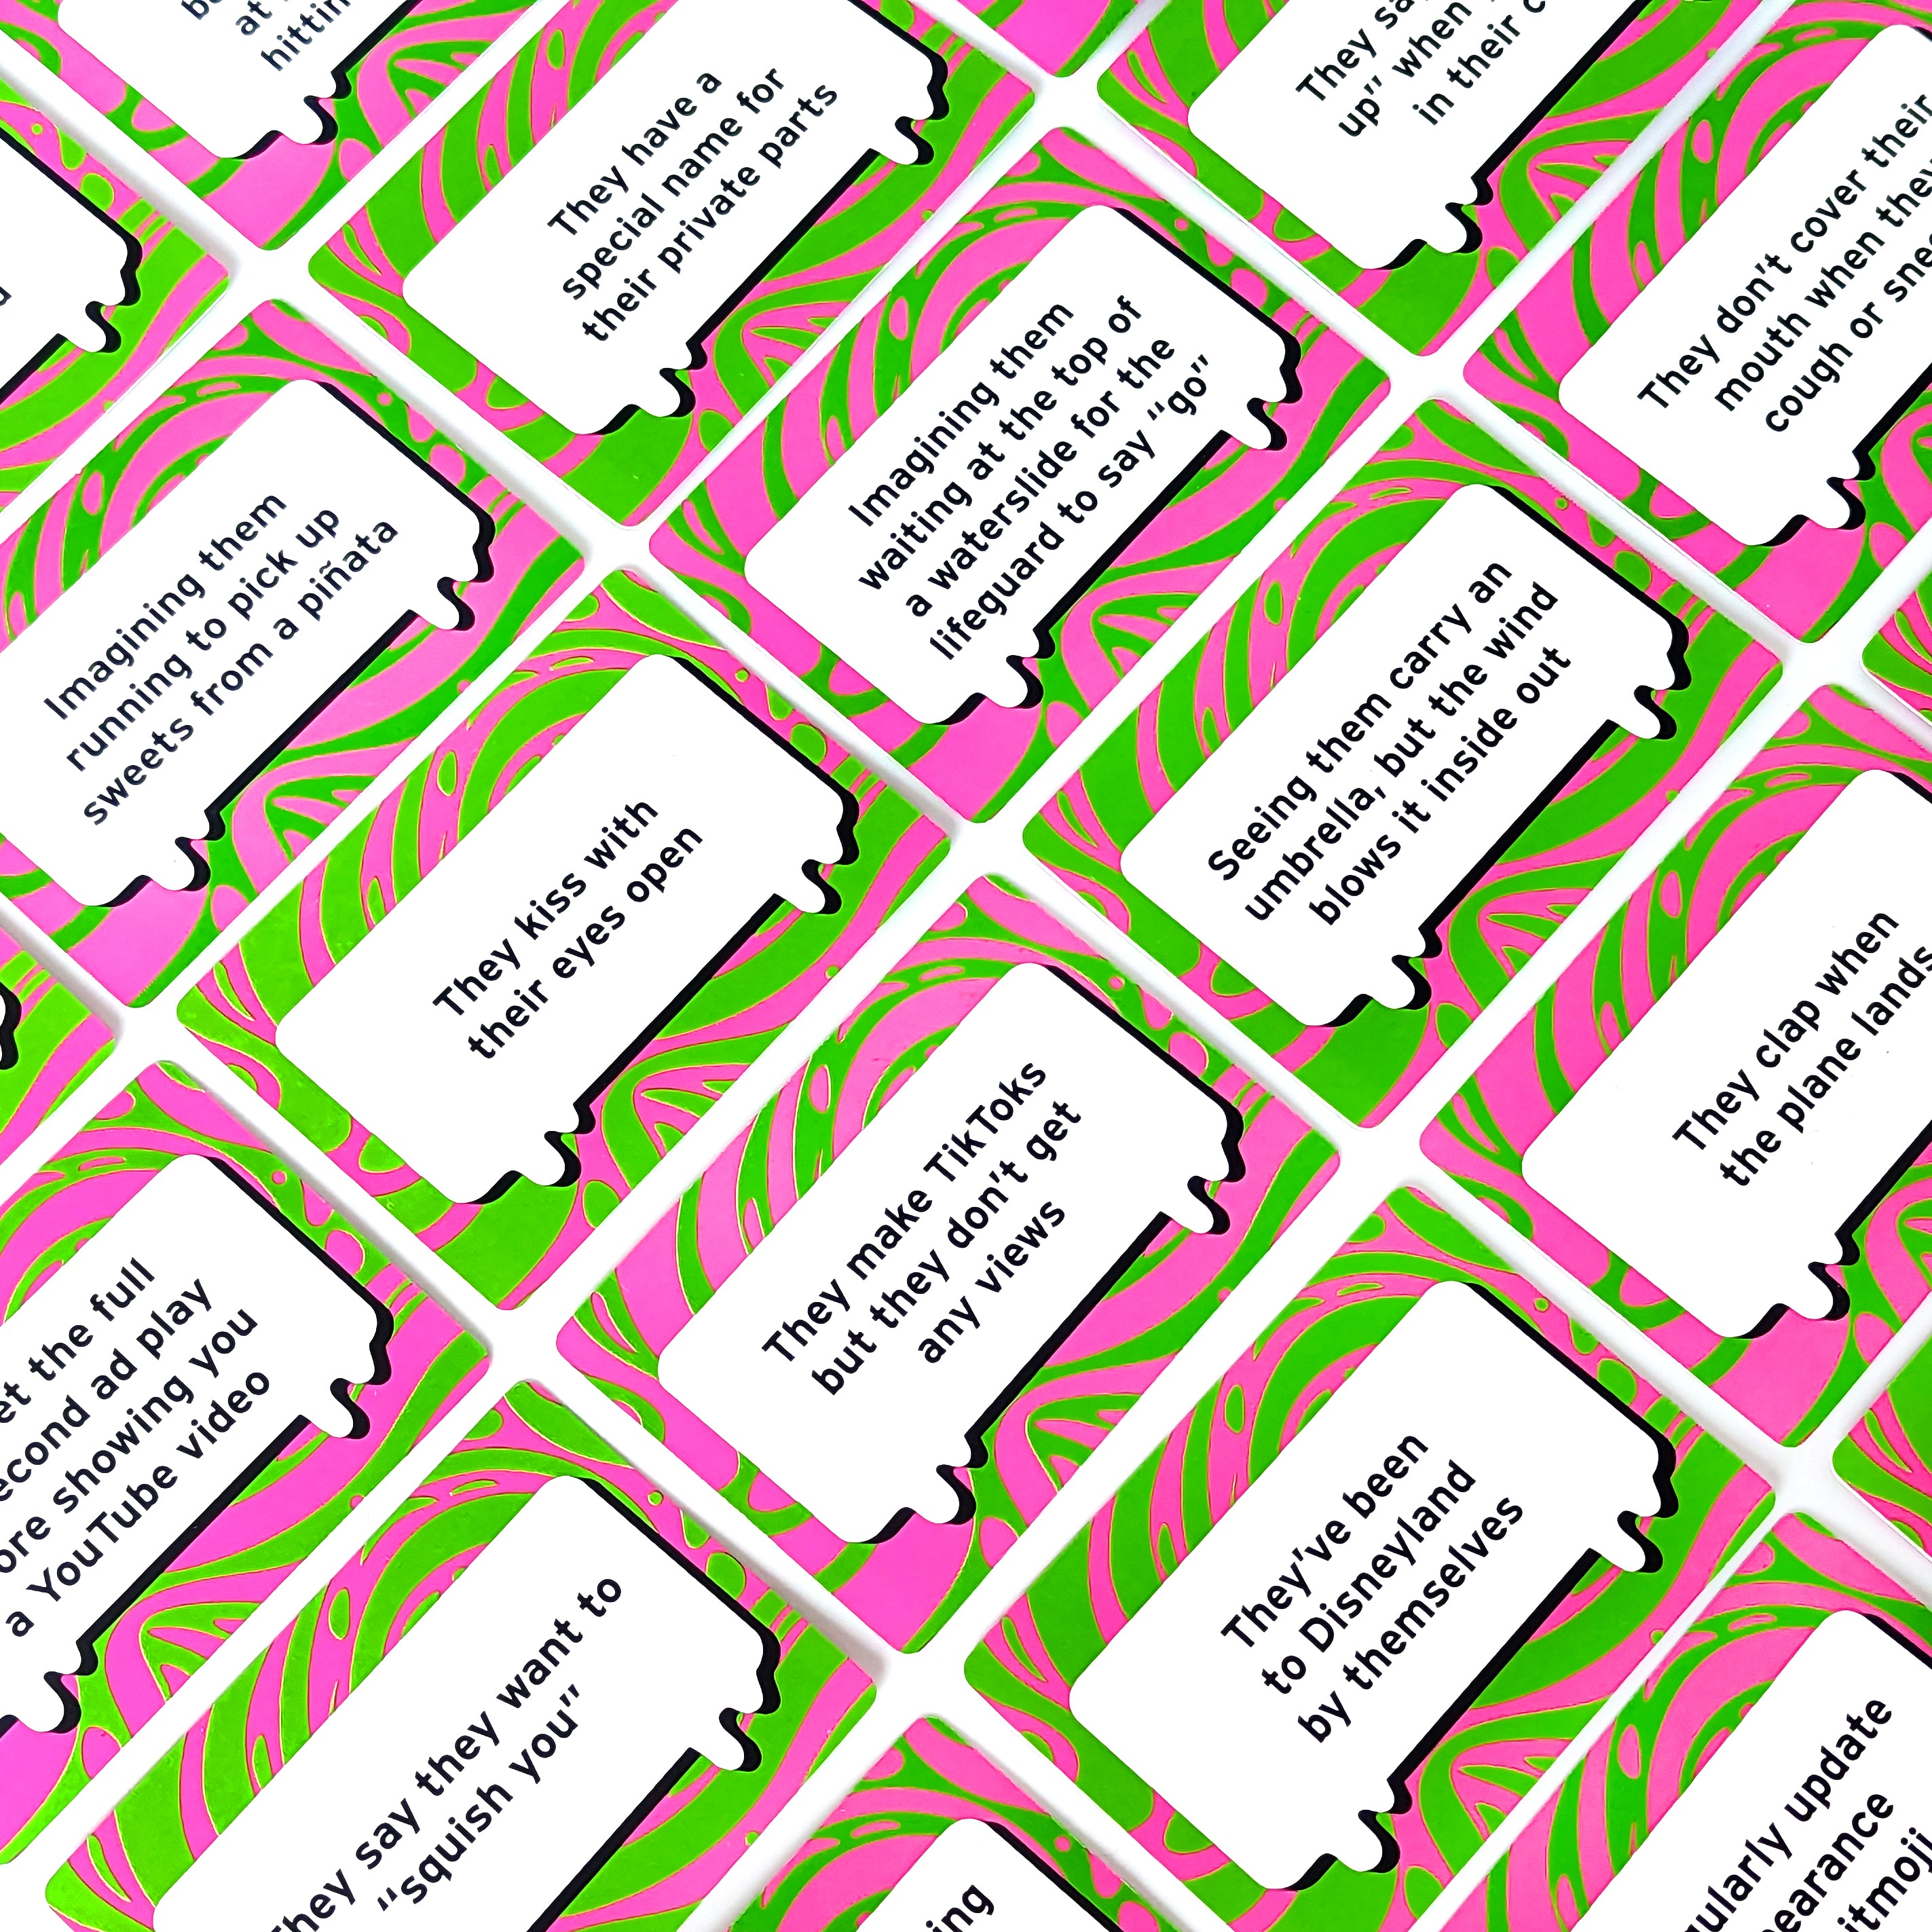 Its a full house funny game cards colorful' Sticker